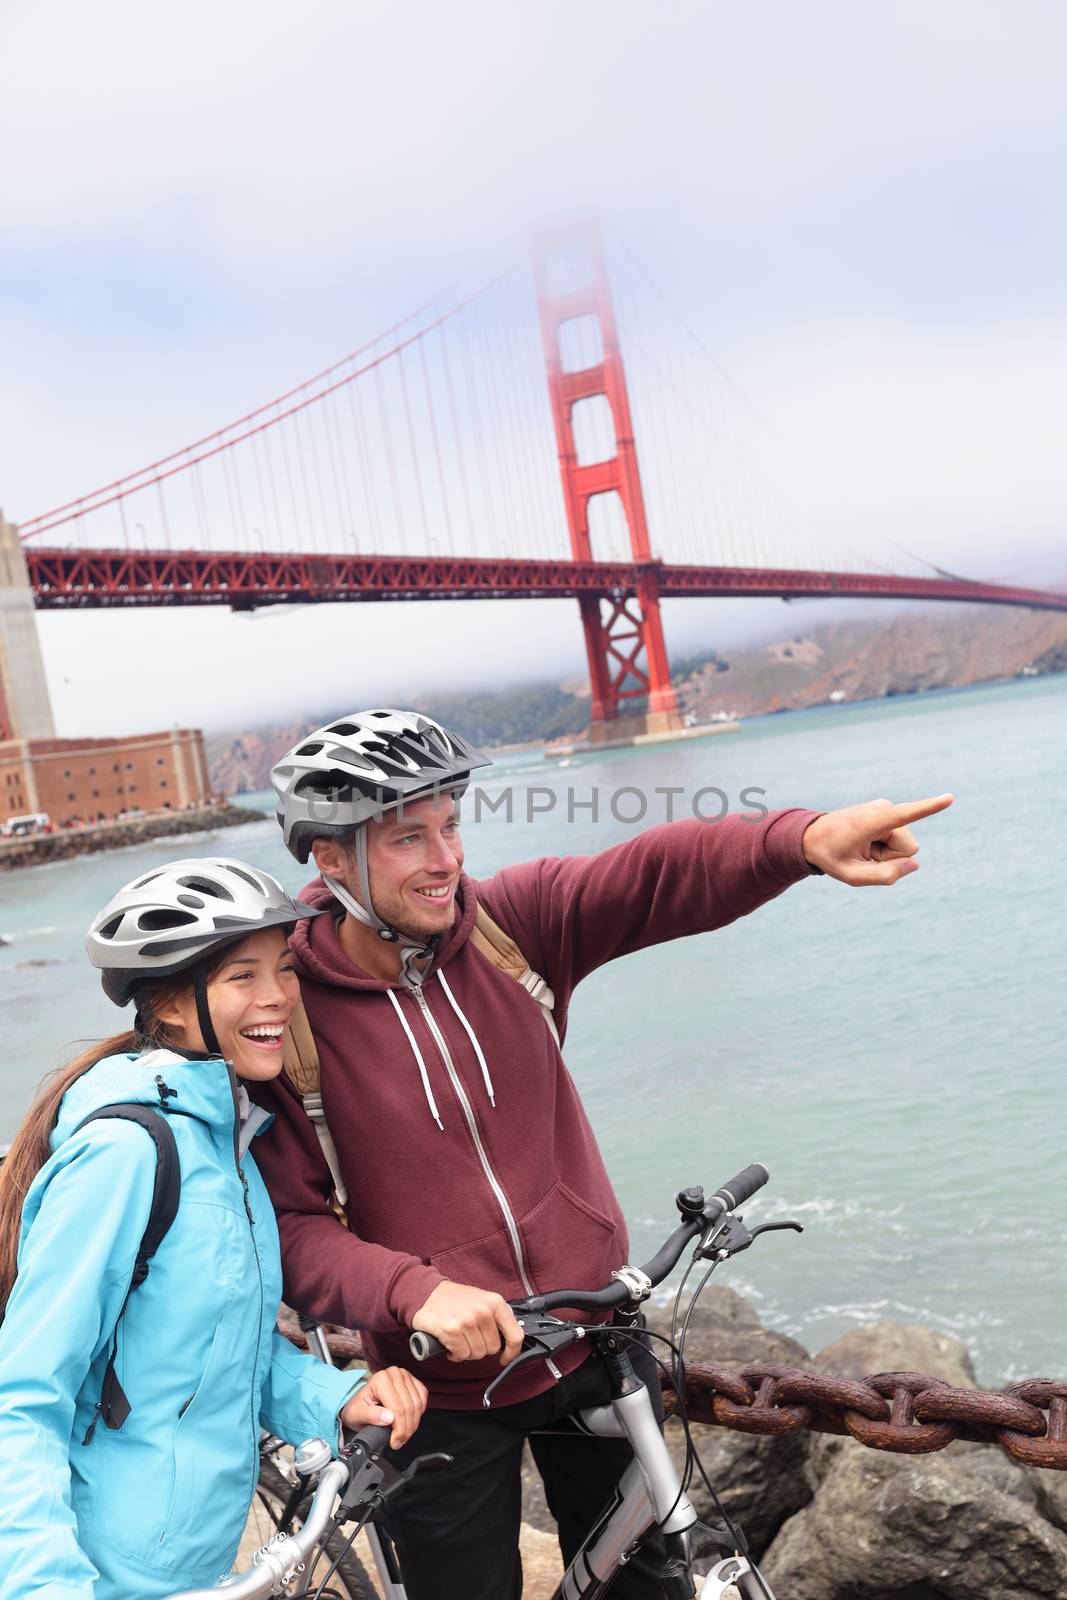 Golden gate Bridge - happy biking couple sightseeing in San Francisco, USA. Portrait of young couple tourists on bike tour enjoying the view at the famous travel landmark in California, USA.